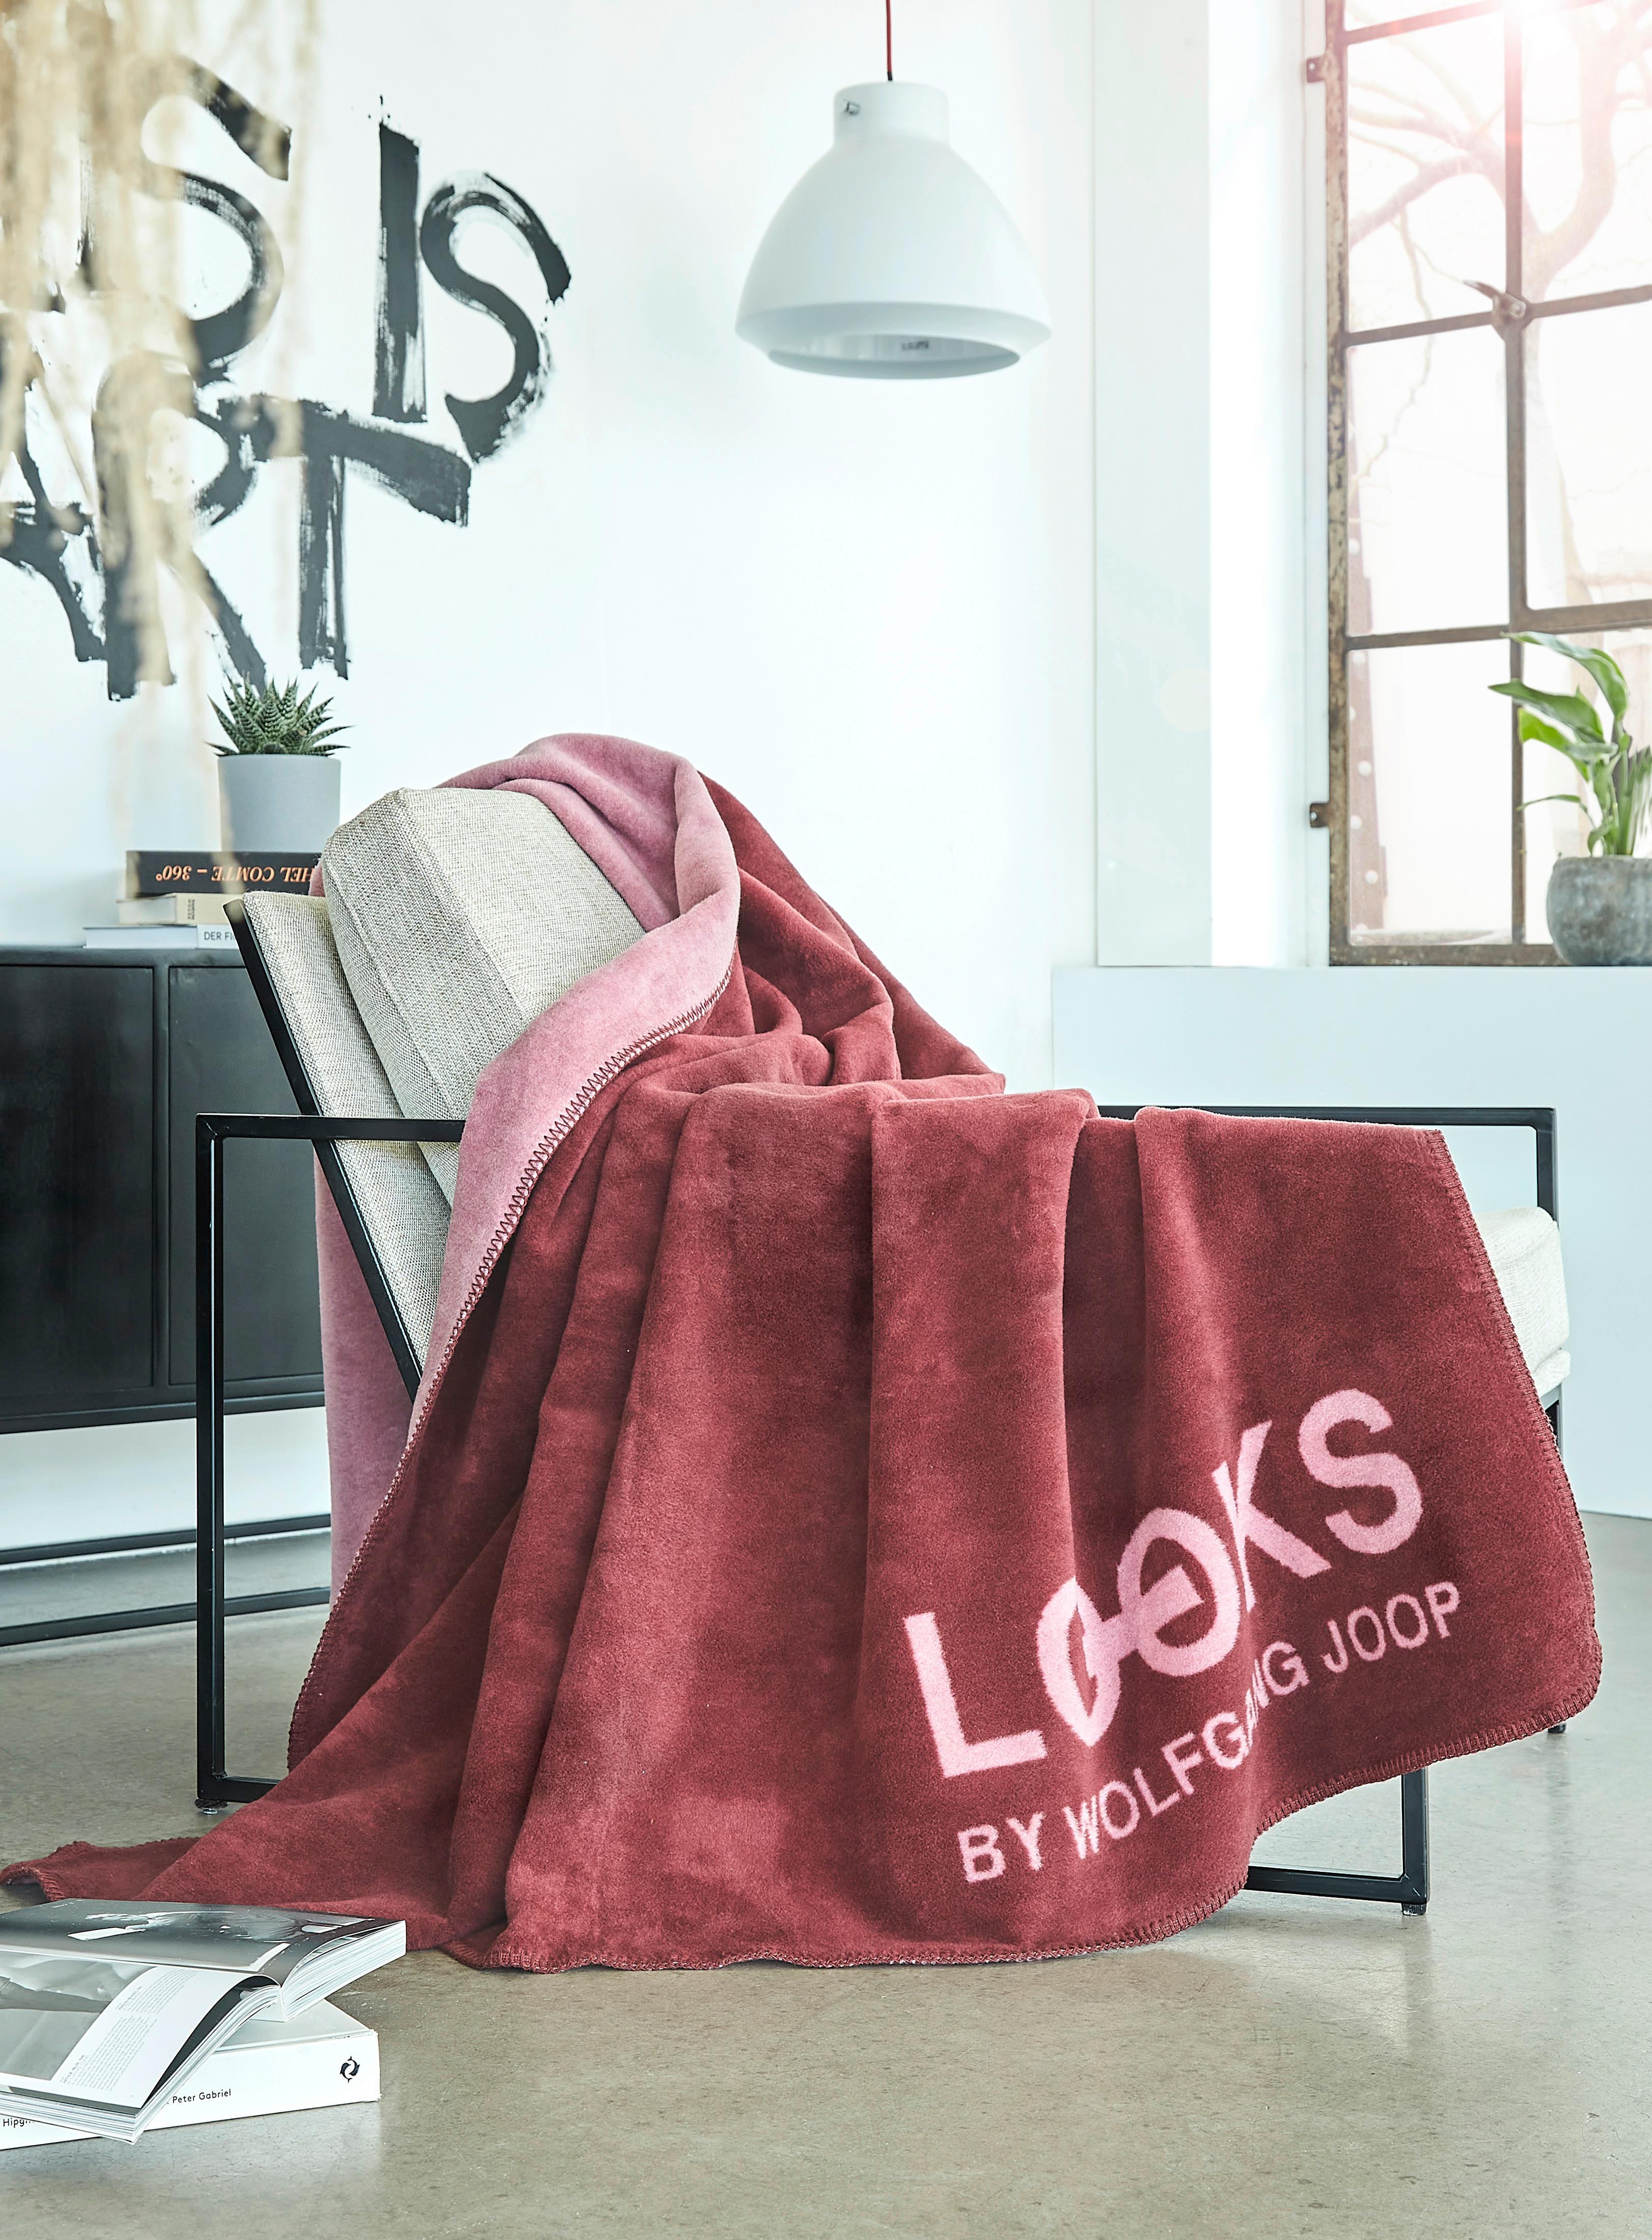 Kuscheldecke Looks Rosa/Rot 150x200 cm Double Face - Rot/Rosa, KONVENTIONELL, Textil (150/200cm) - LOOKS by W.Joop